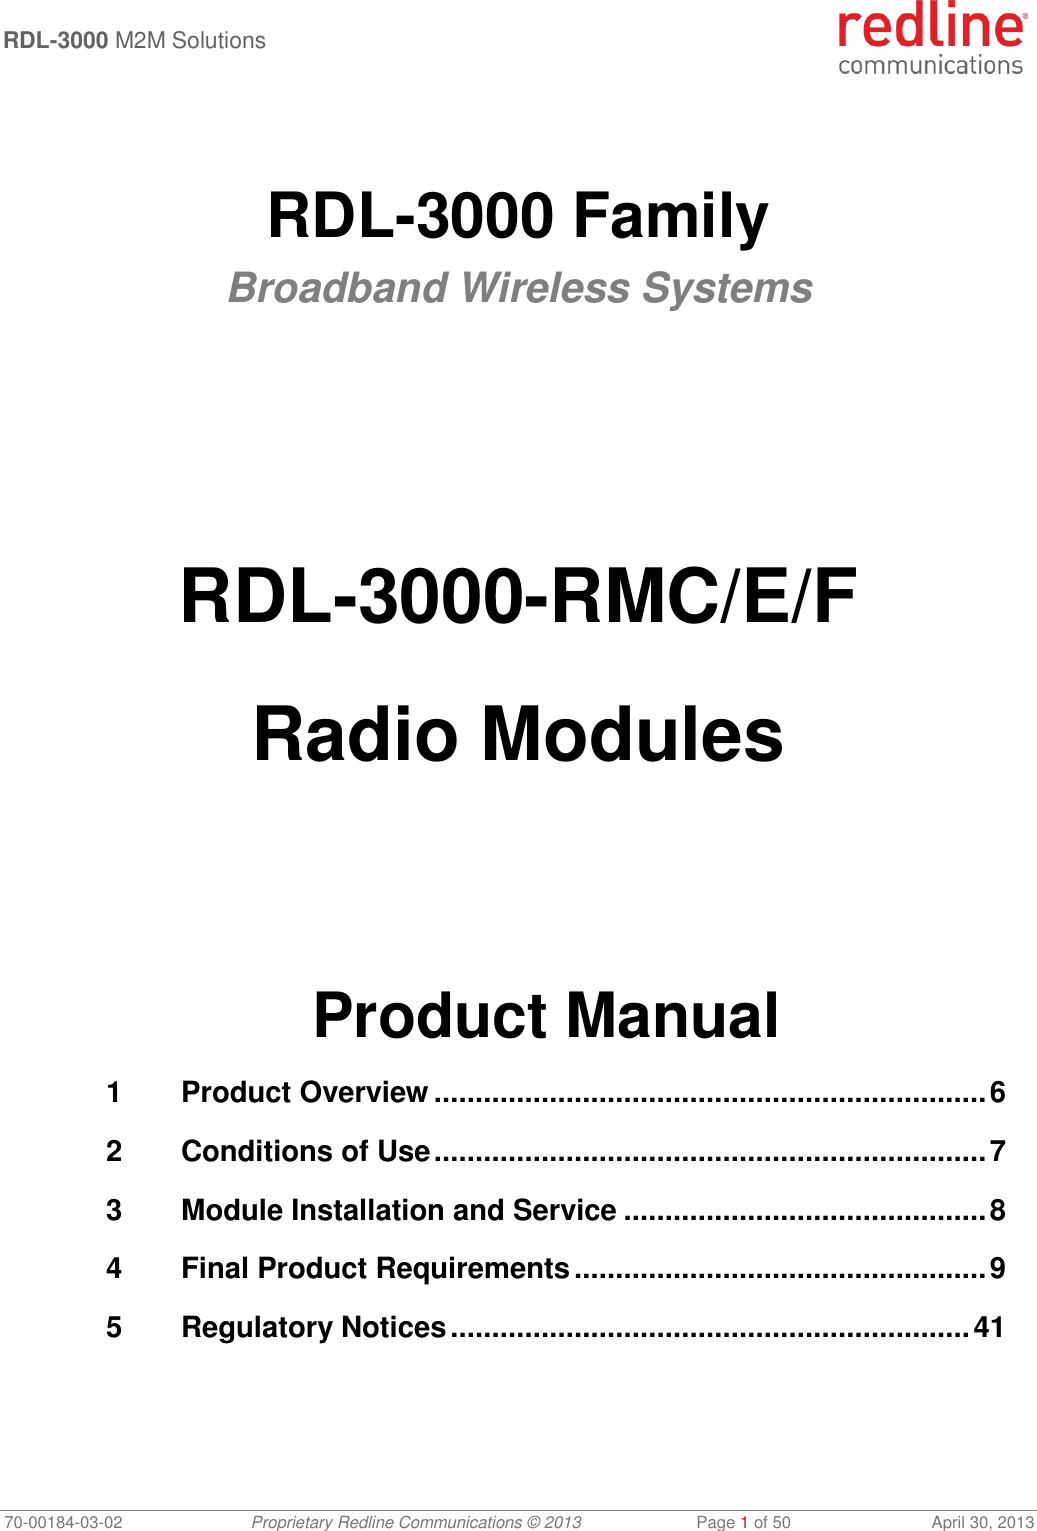  RDL-3000 M2M Solutions   70-00184-03-02 Proprietary Redline Communications © 2013  Page 1 of 50  April 30, 2013   RDL-3000 Family Broadband Wireless Systems        RDL-3000-RMC/E/F  Radio Modules       Product Manual 1 Product Overview ................................................................... 6 2 Conditions of Use ................................................................... 7 3 Module Installation and Service ............................................ 8 4 Final Product Requirements .................................................. 9 5 Regulatory Notices ............................................................... 41 